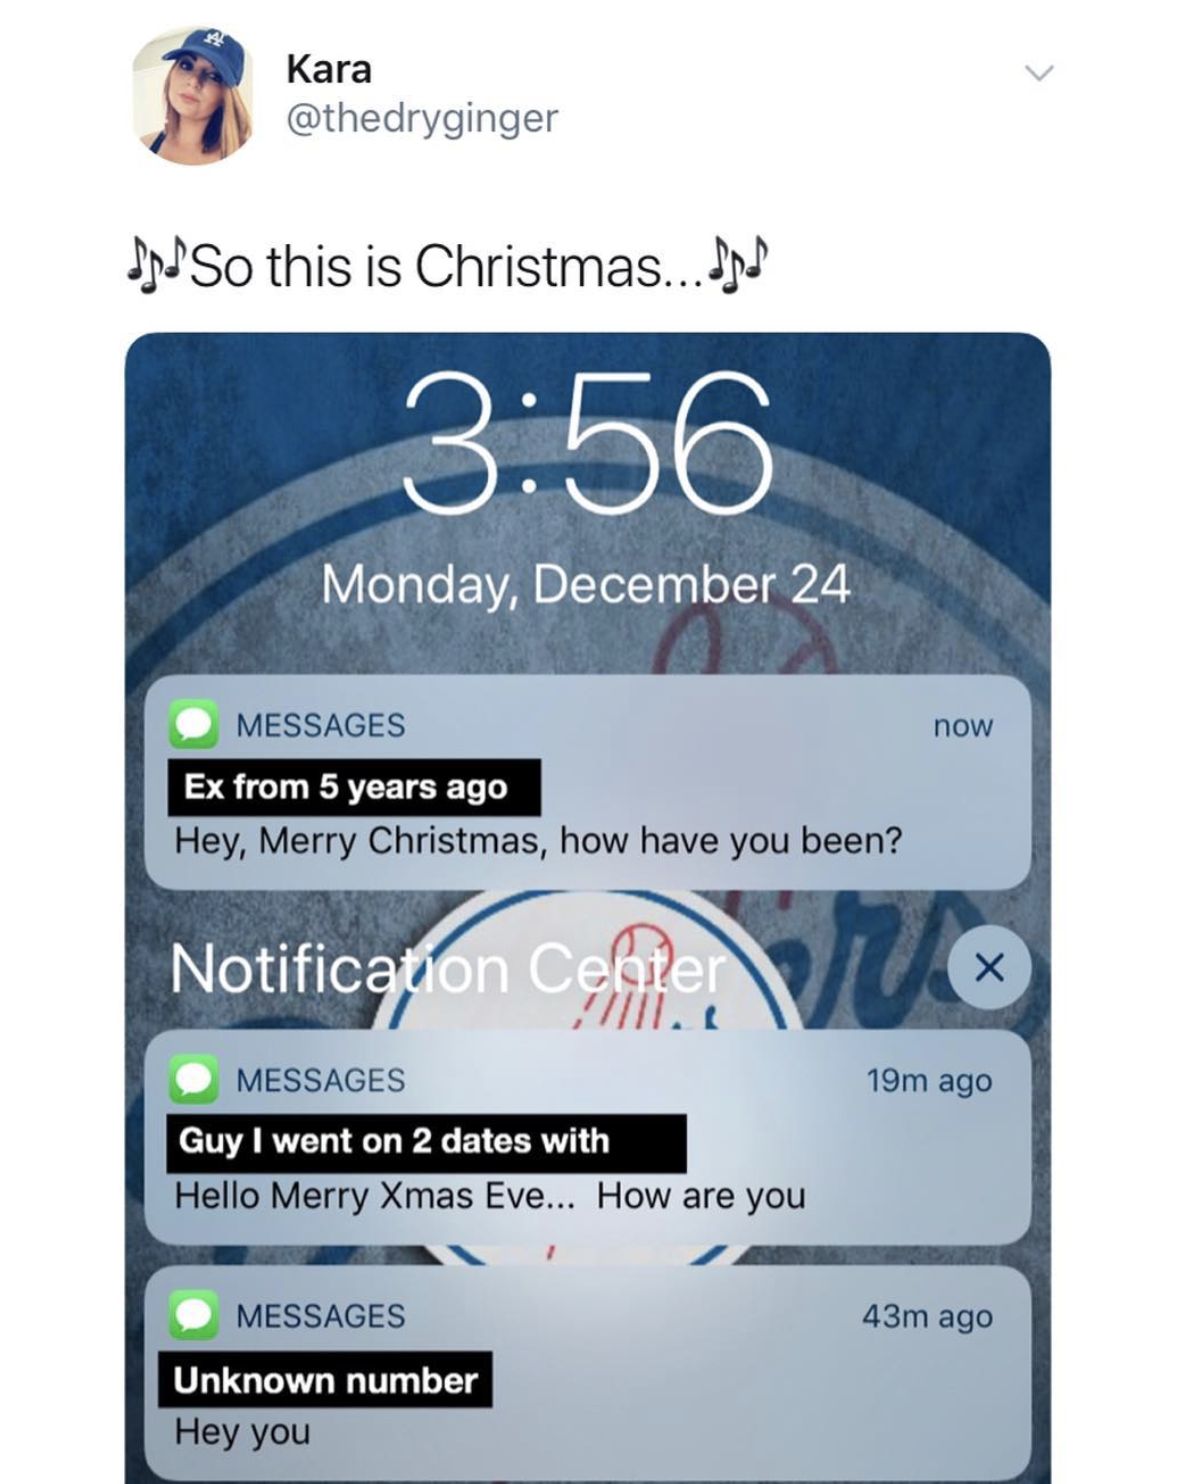 software - Kara In So this is Christmas... Monday, December 24 now Messages Ex from 5 years ago Hey, Merry Christmas, how have you been? Notification Center V e 19m ago Messages Guy I went on 2 dates with Hello Merry Xmas Eve... How are you 43m ago Messag